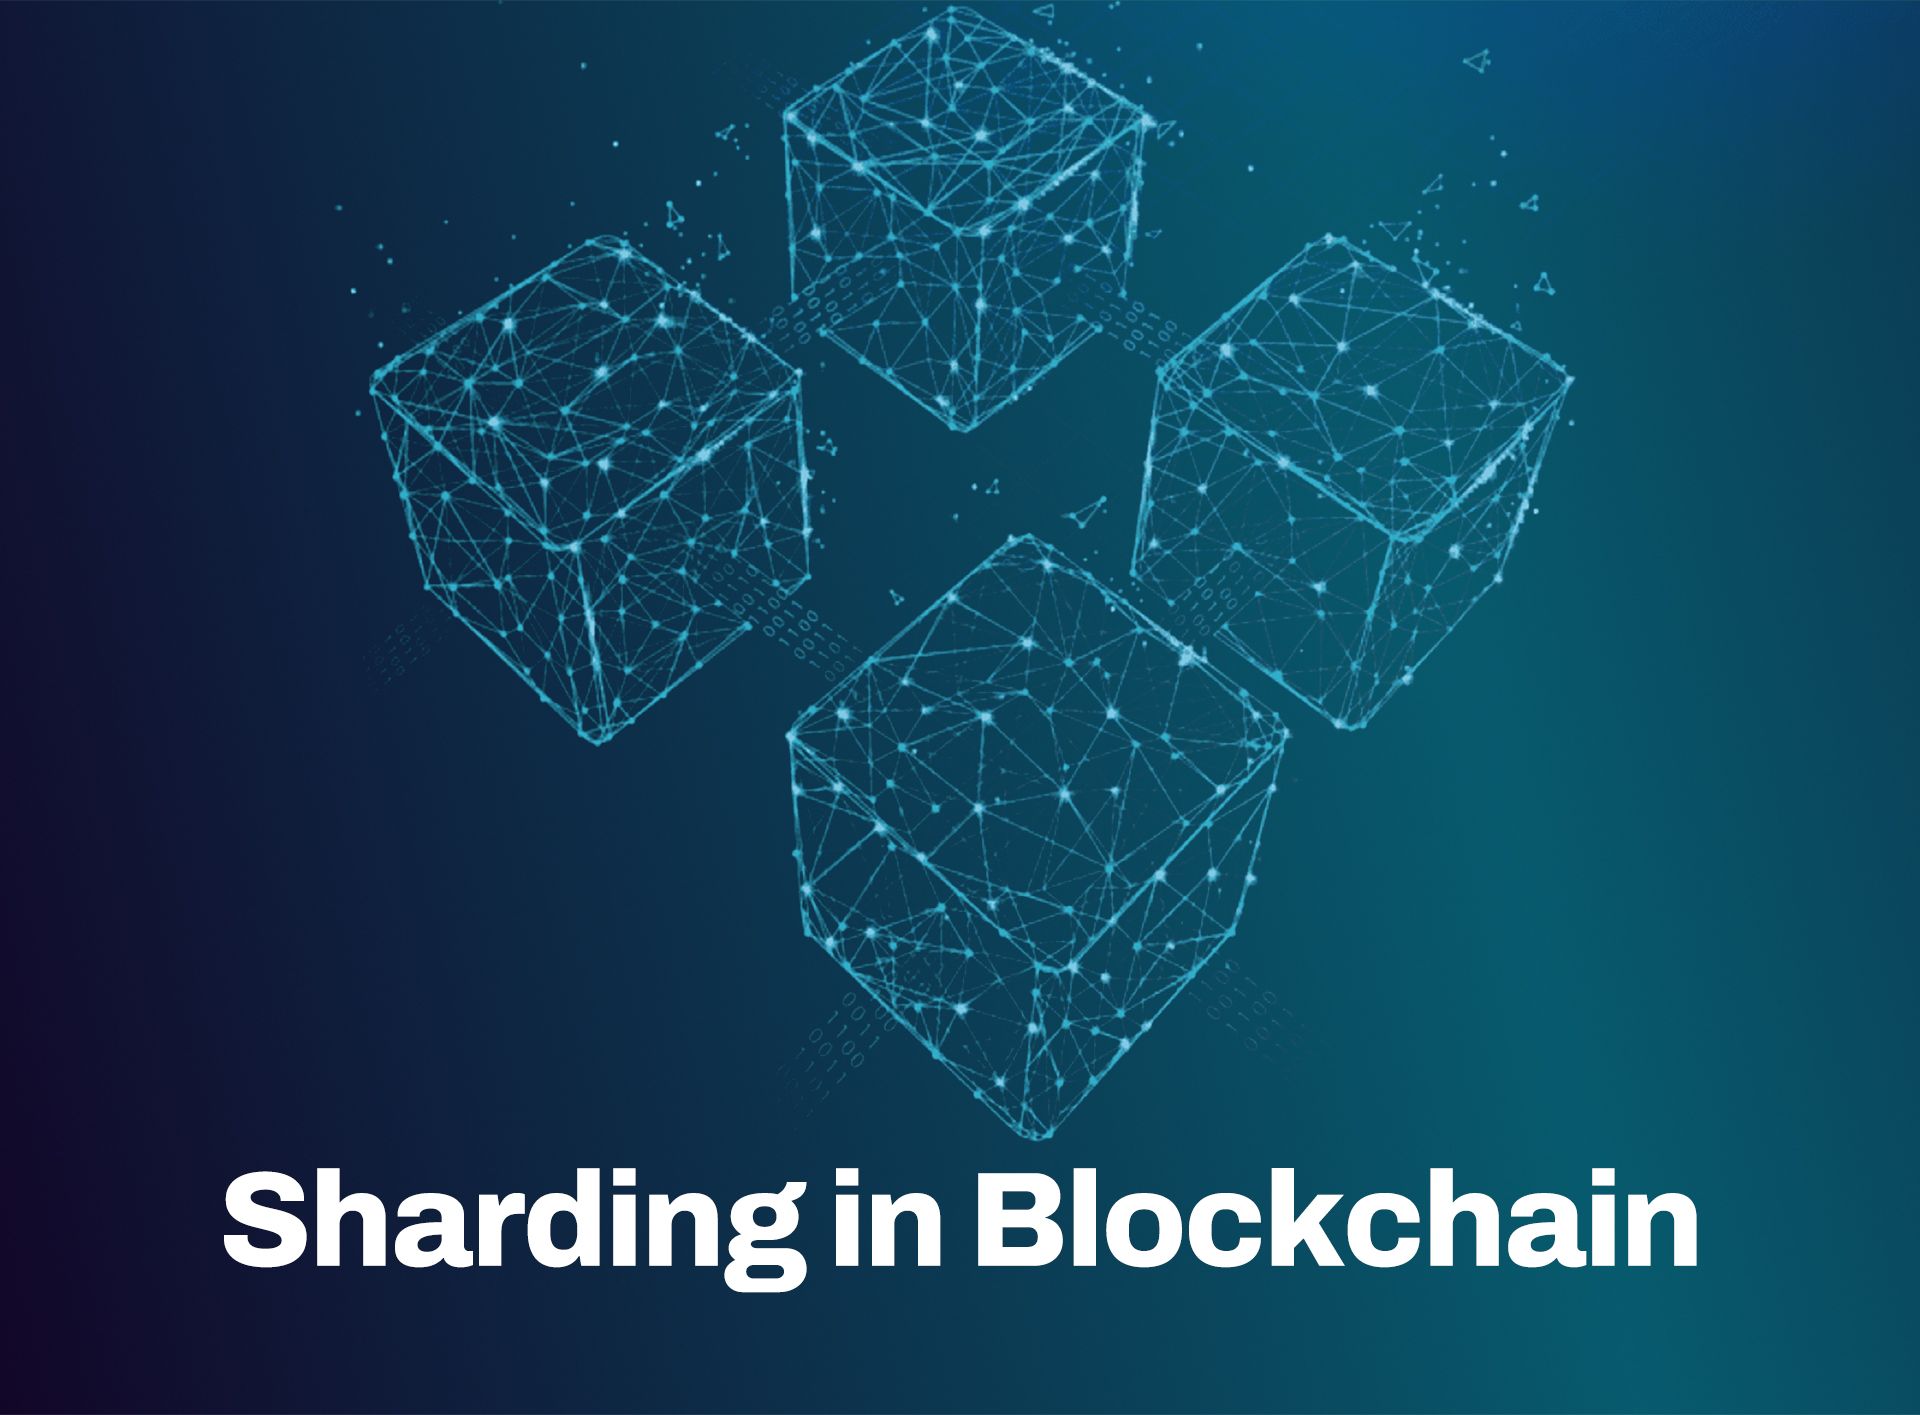 What is Sharding in Blockchain?